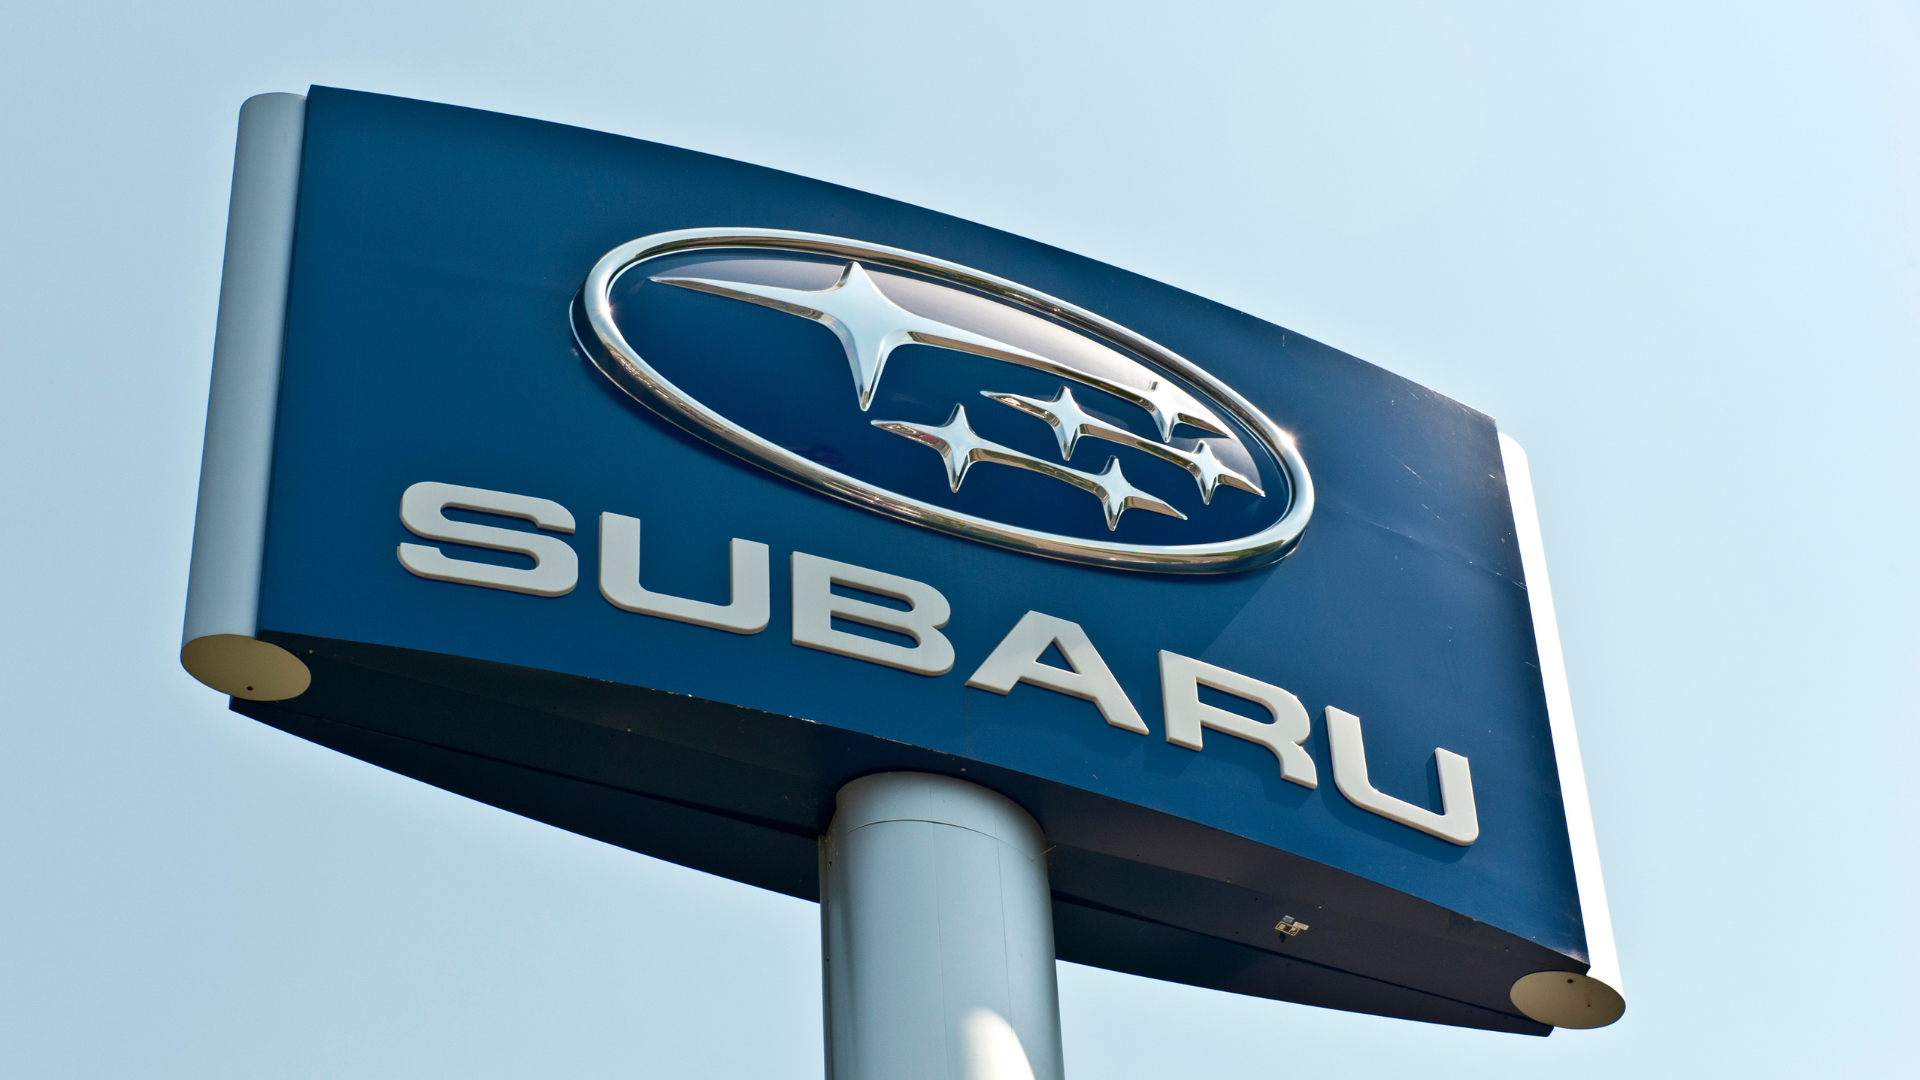 Subaru is recalling 271,694 SUVs because some of them could catch fire....